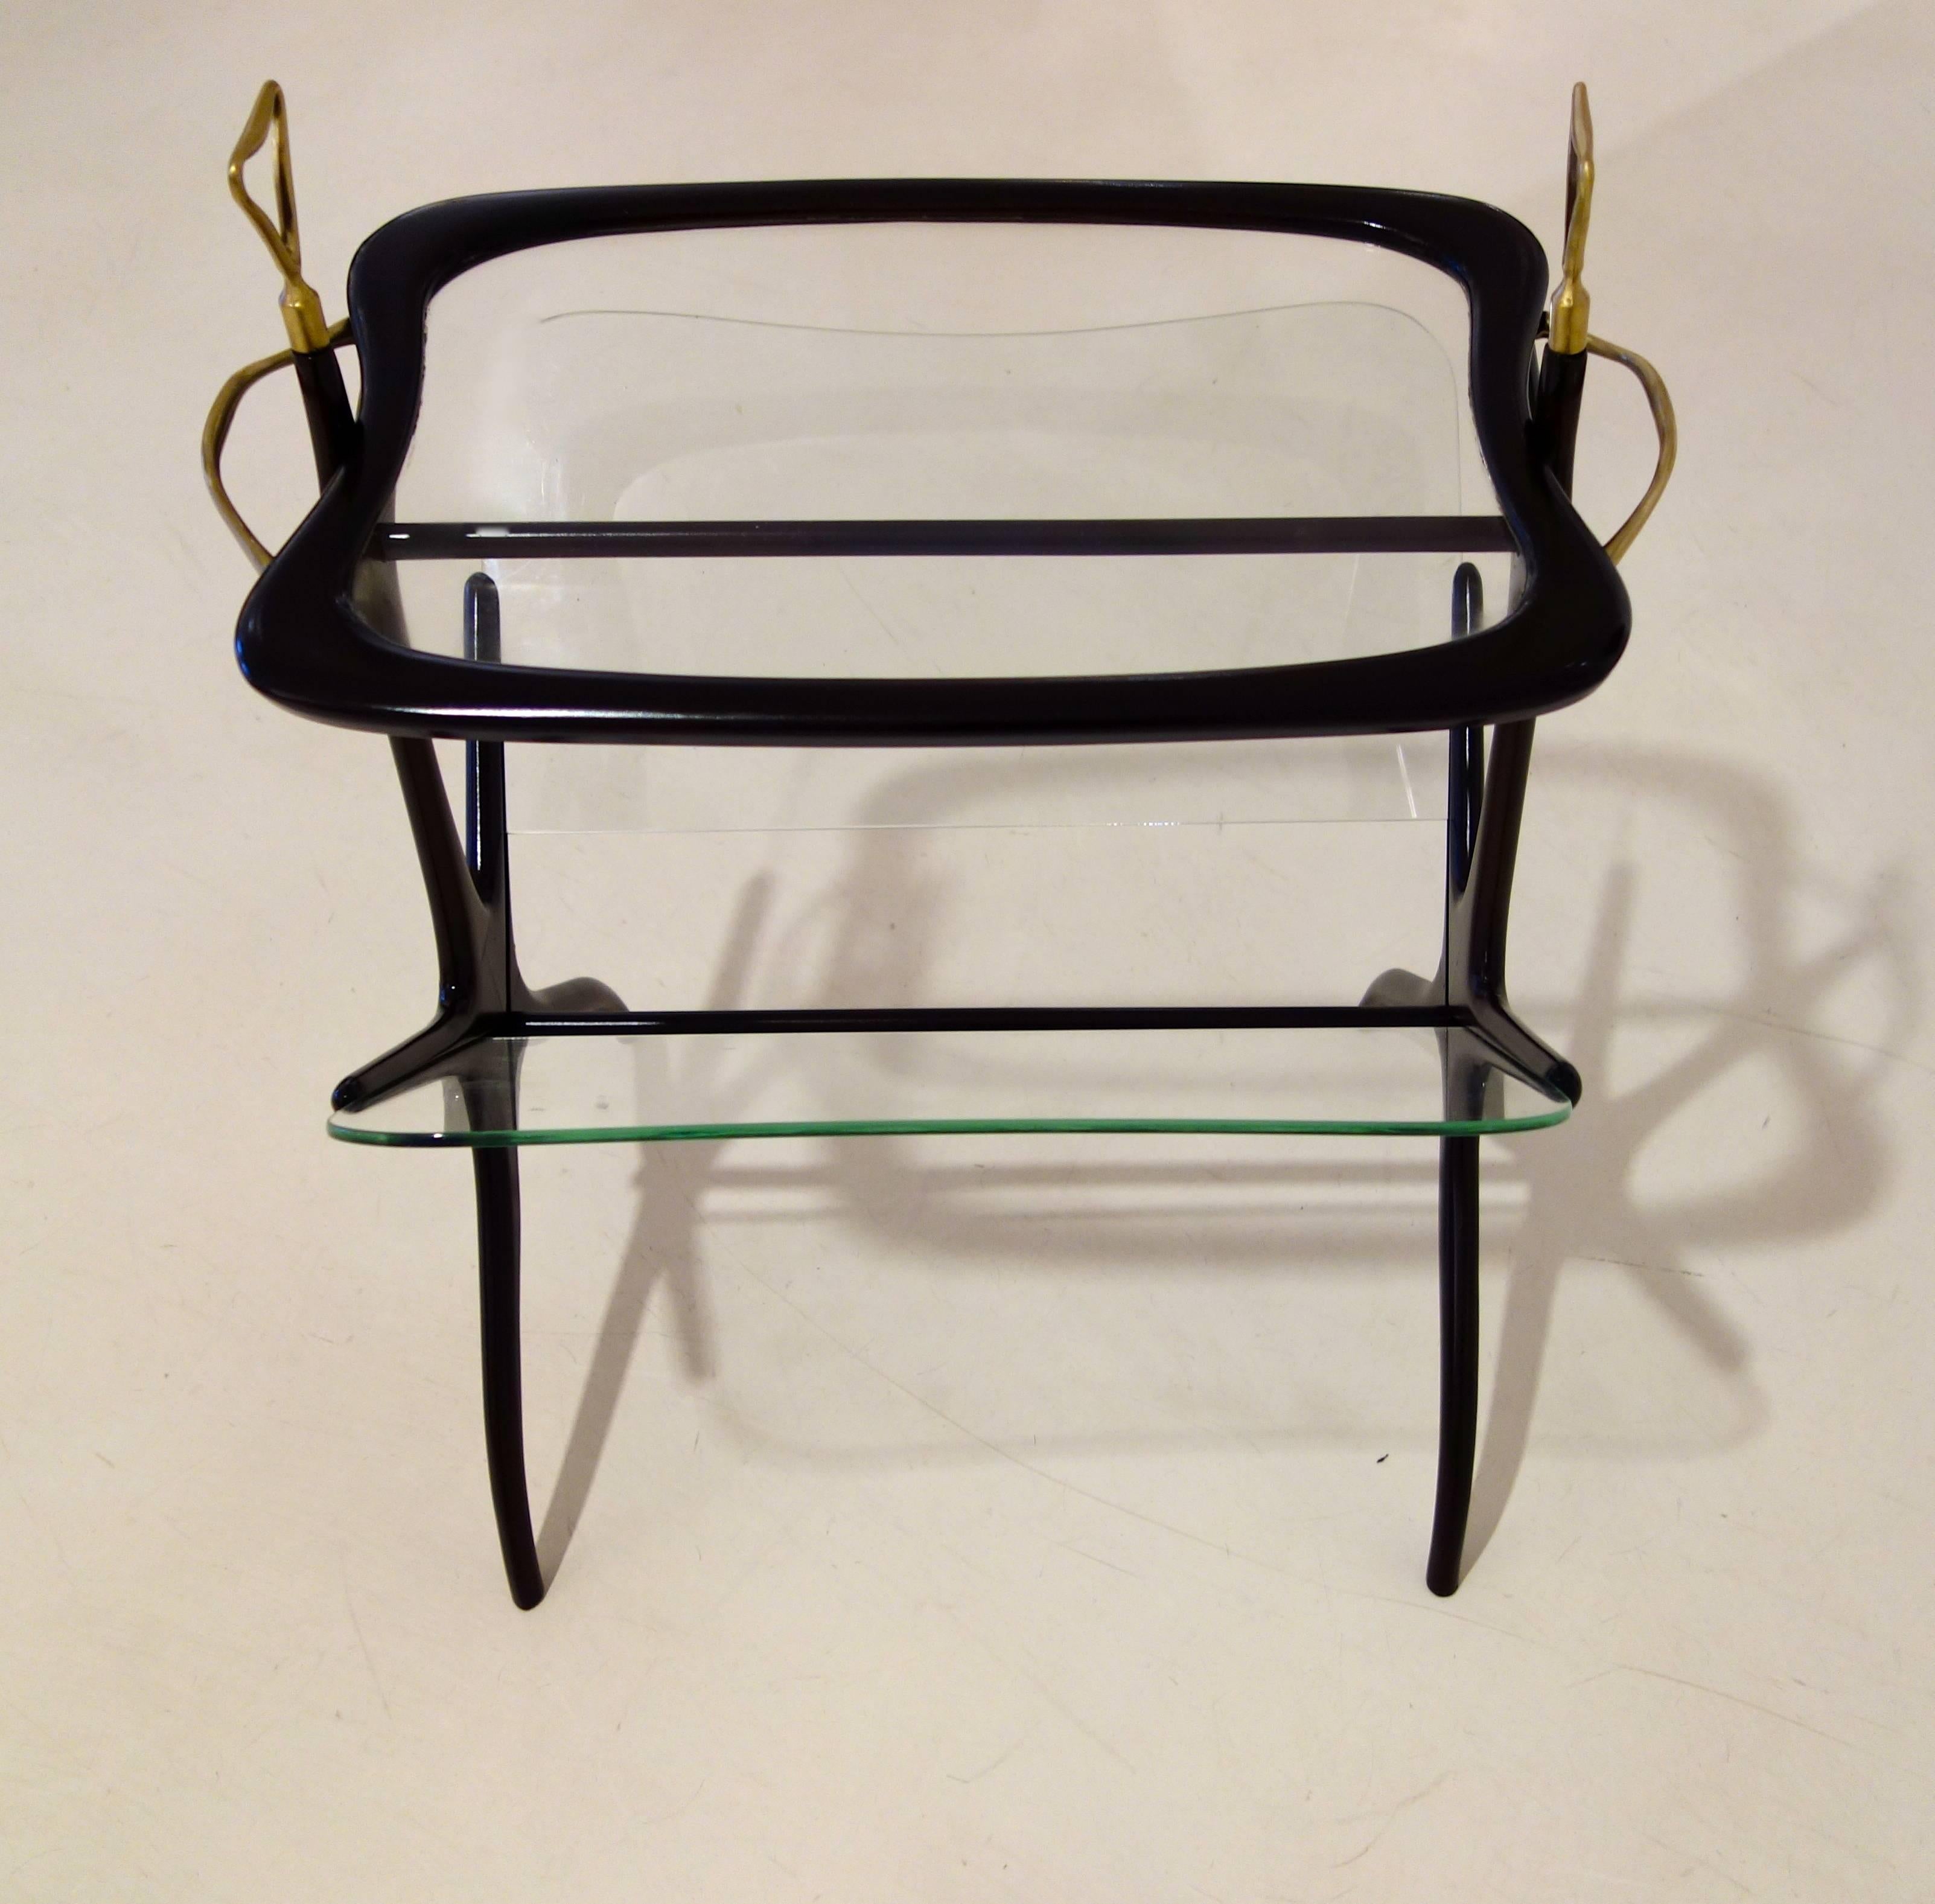 Italian Mid-Century side table featuring a removable tray top resting on a glass sided magazine rack with brass finials and handles.